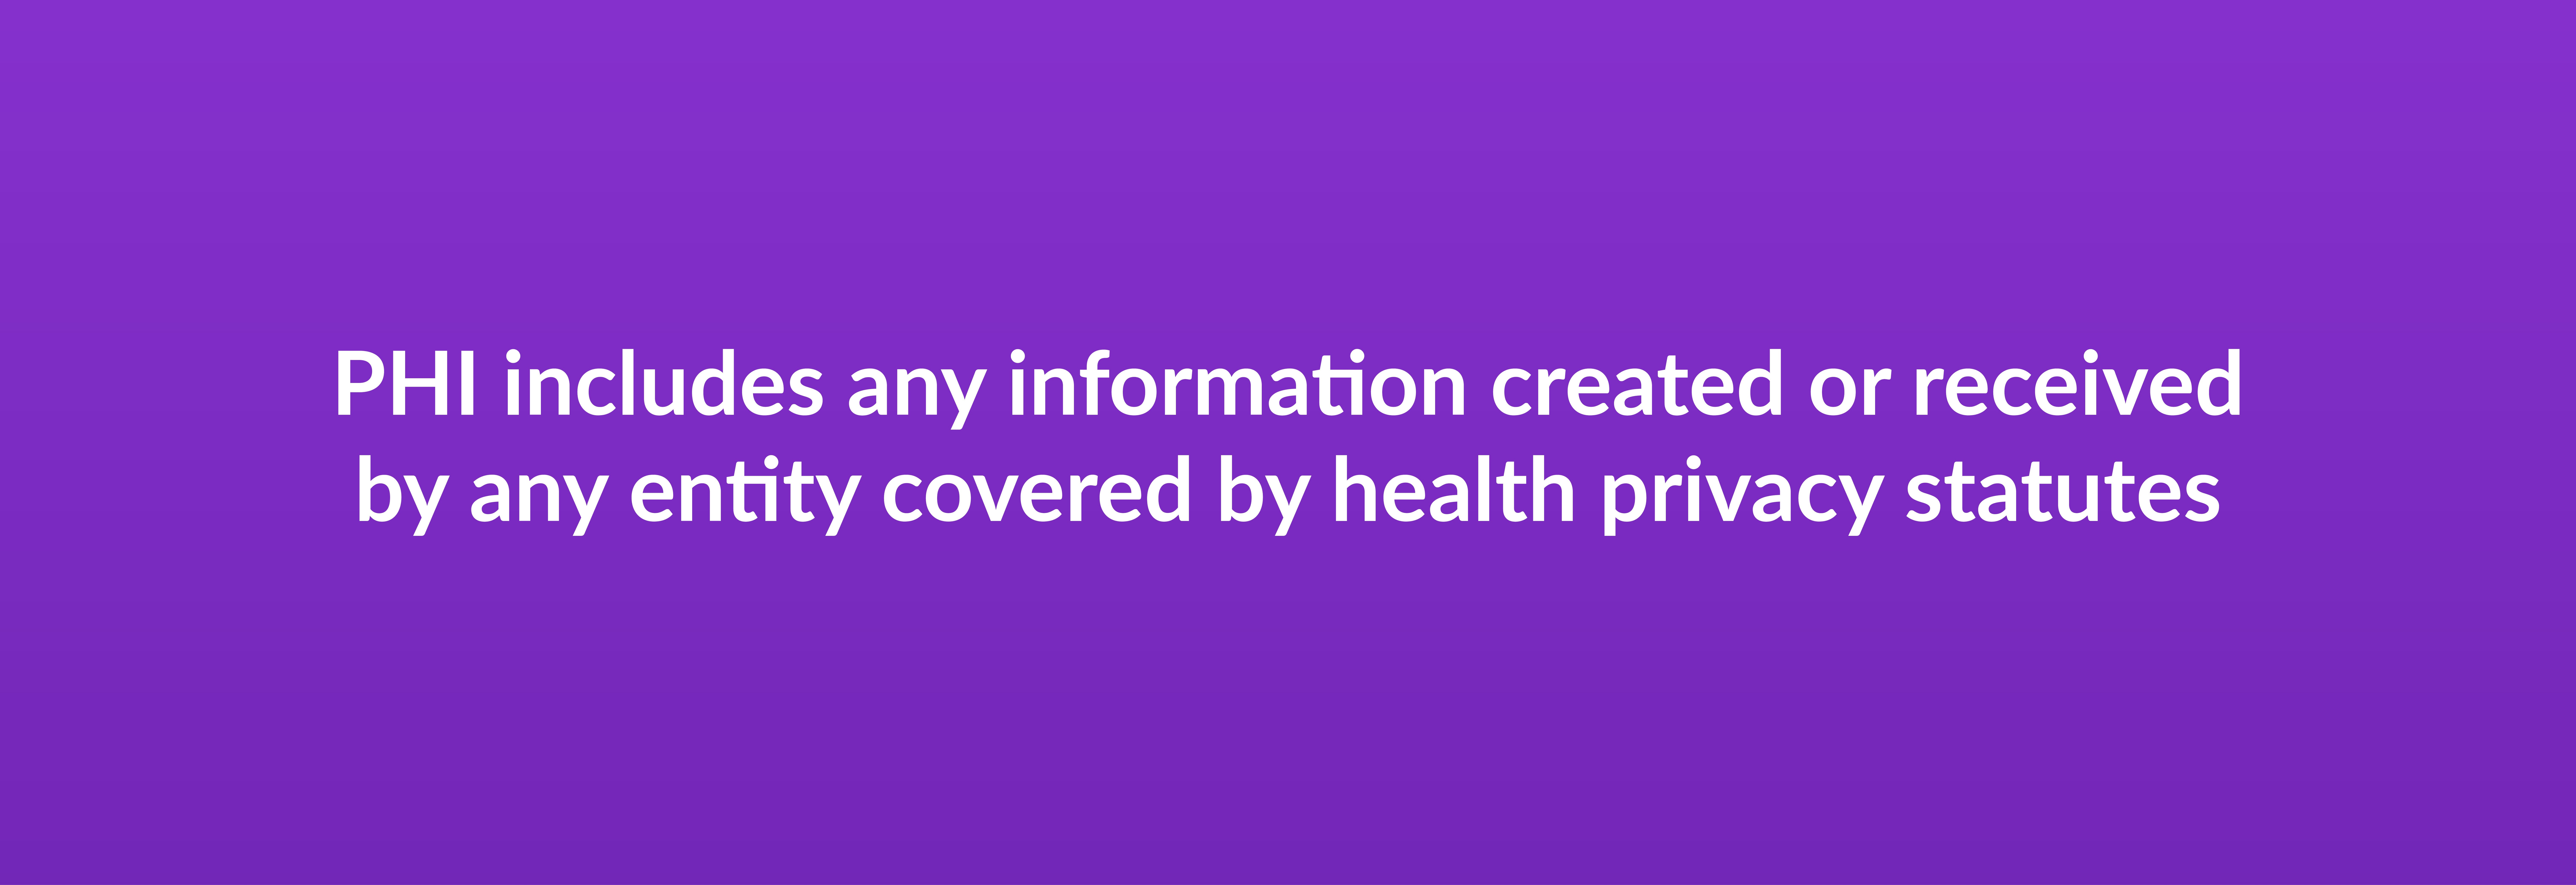 PHI includes any information created or received by any entity covered by health privacy statutes